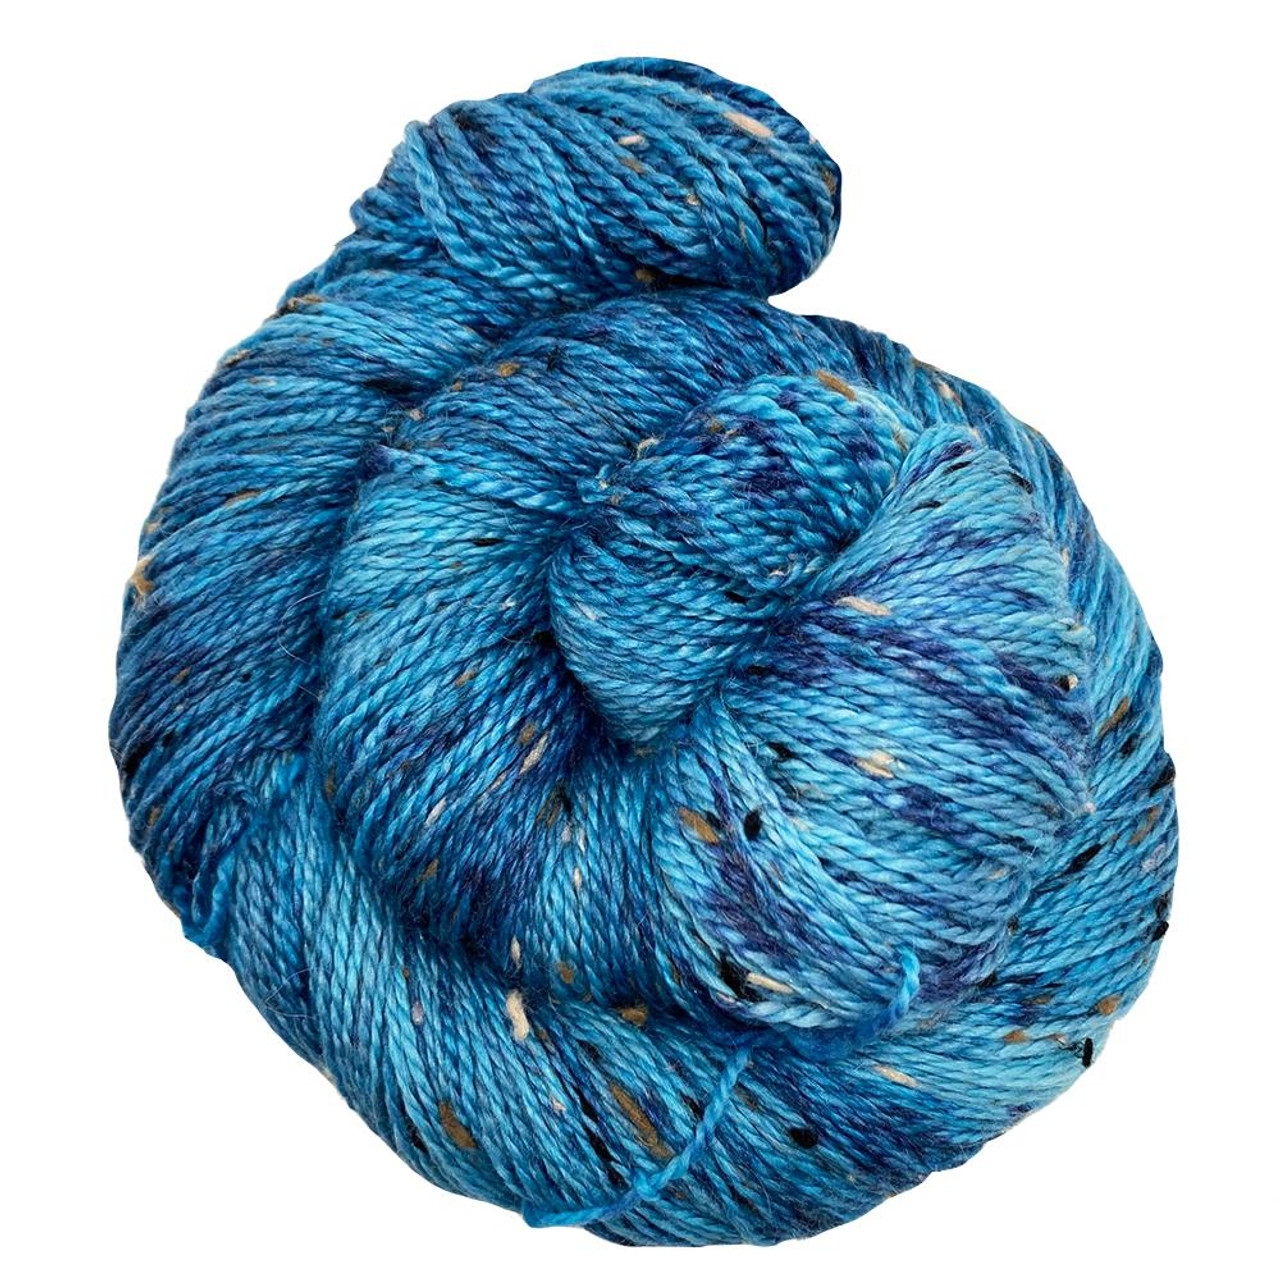 Hand Dyed Yarn Worsted Weight Yarn Speckled Yarn Worsted Yarn Sweater Yarn Multi  Colored Yarn Blue A Stroll in the Park 